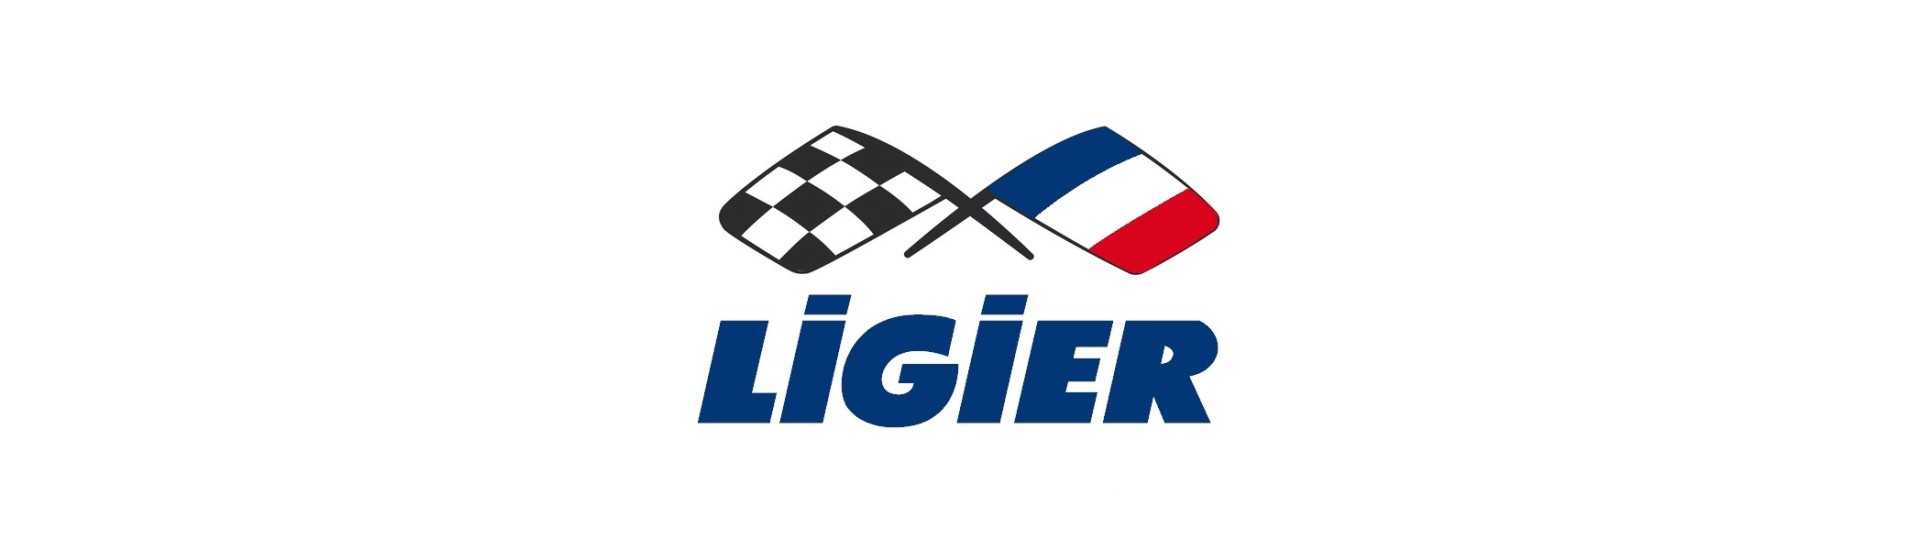 Heating radiator at best price car without a permit Ligier